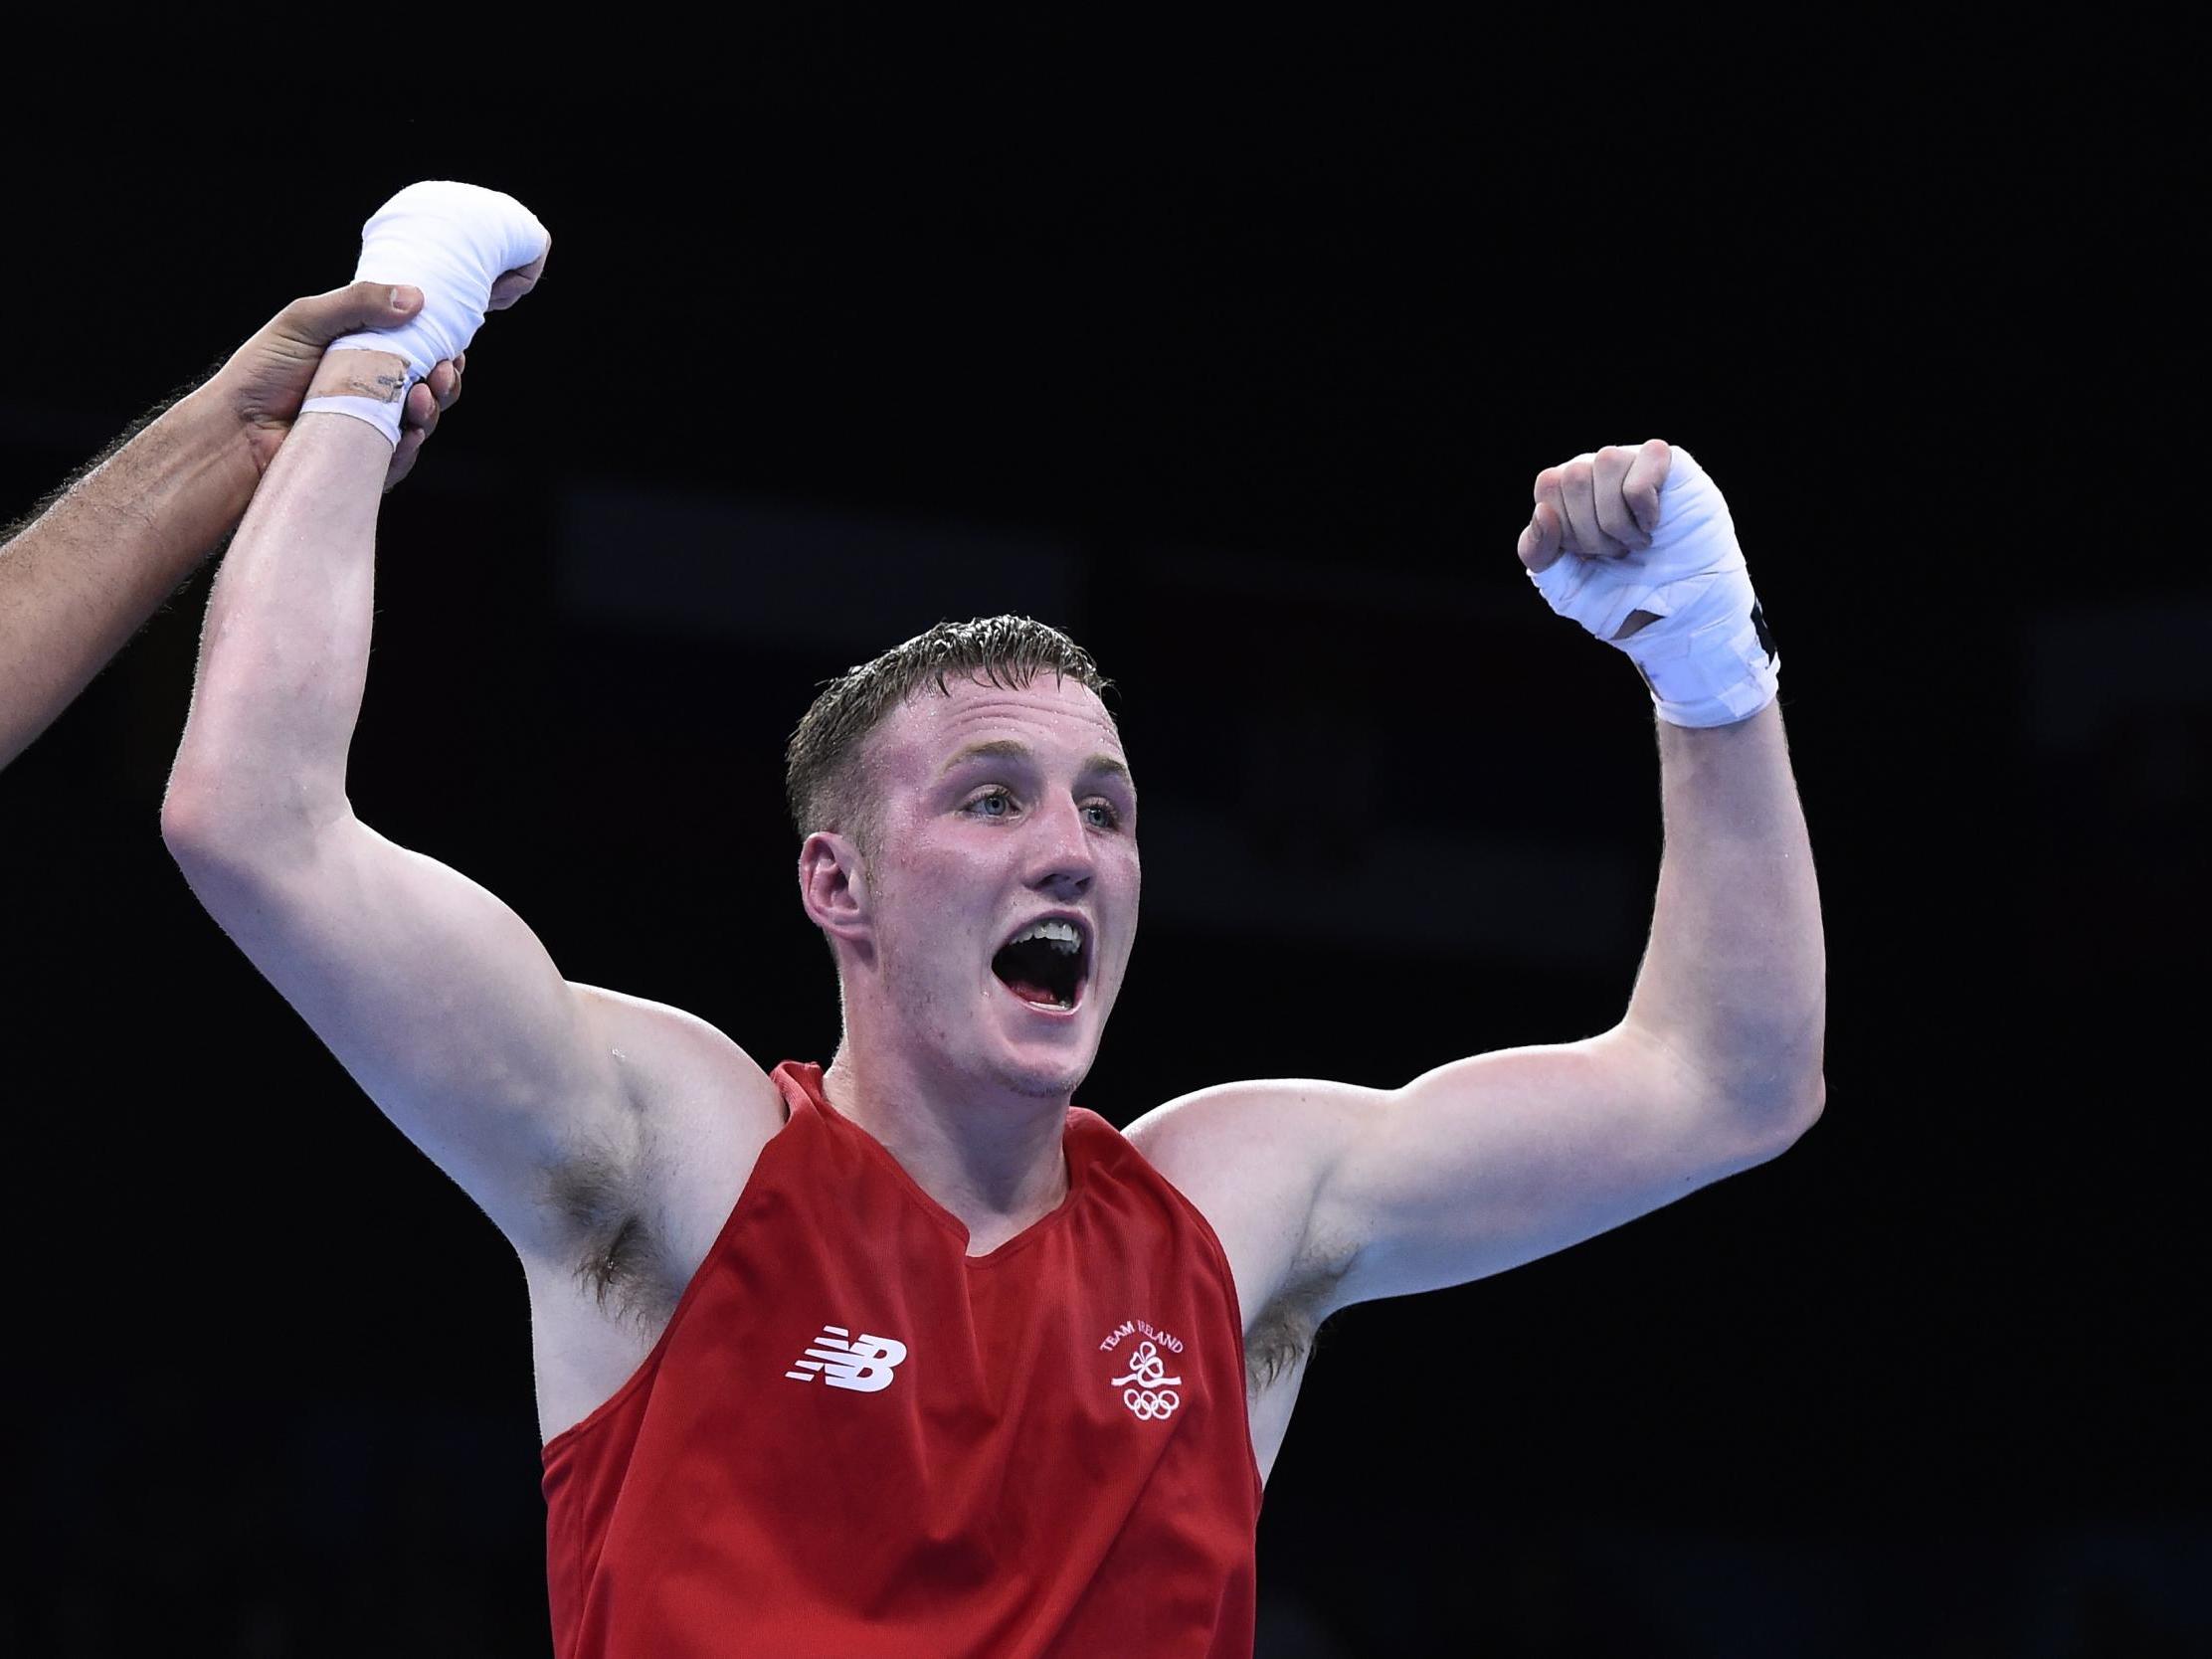 Irish boxer Michael O Reilly is due to come off a ban